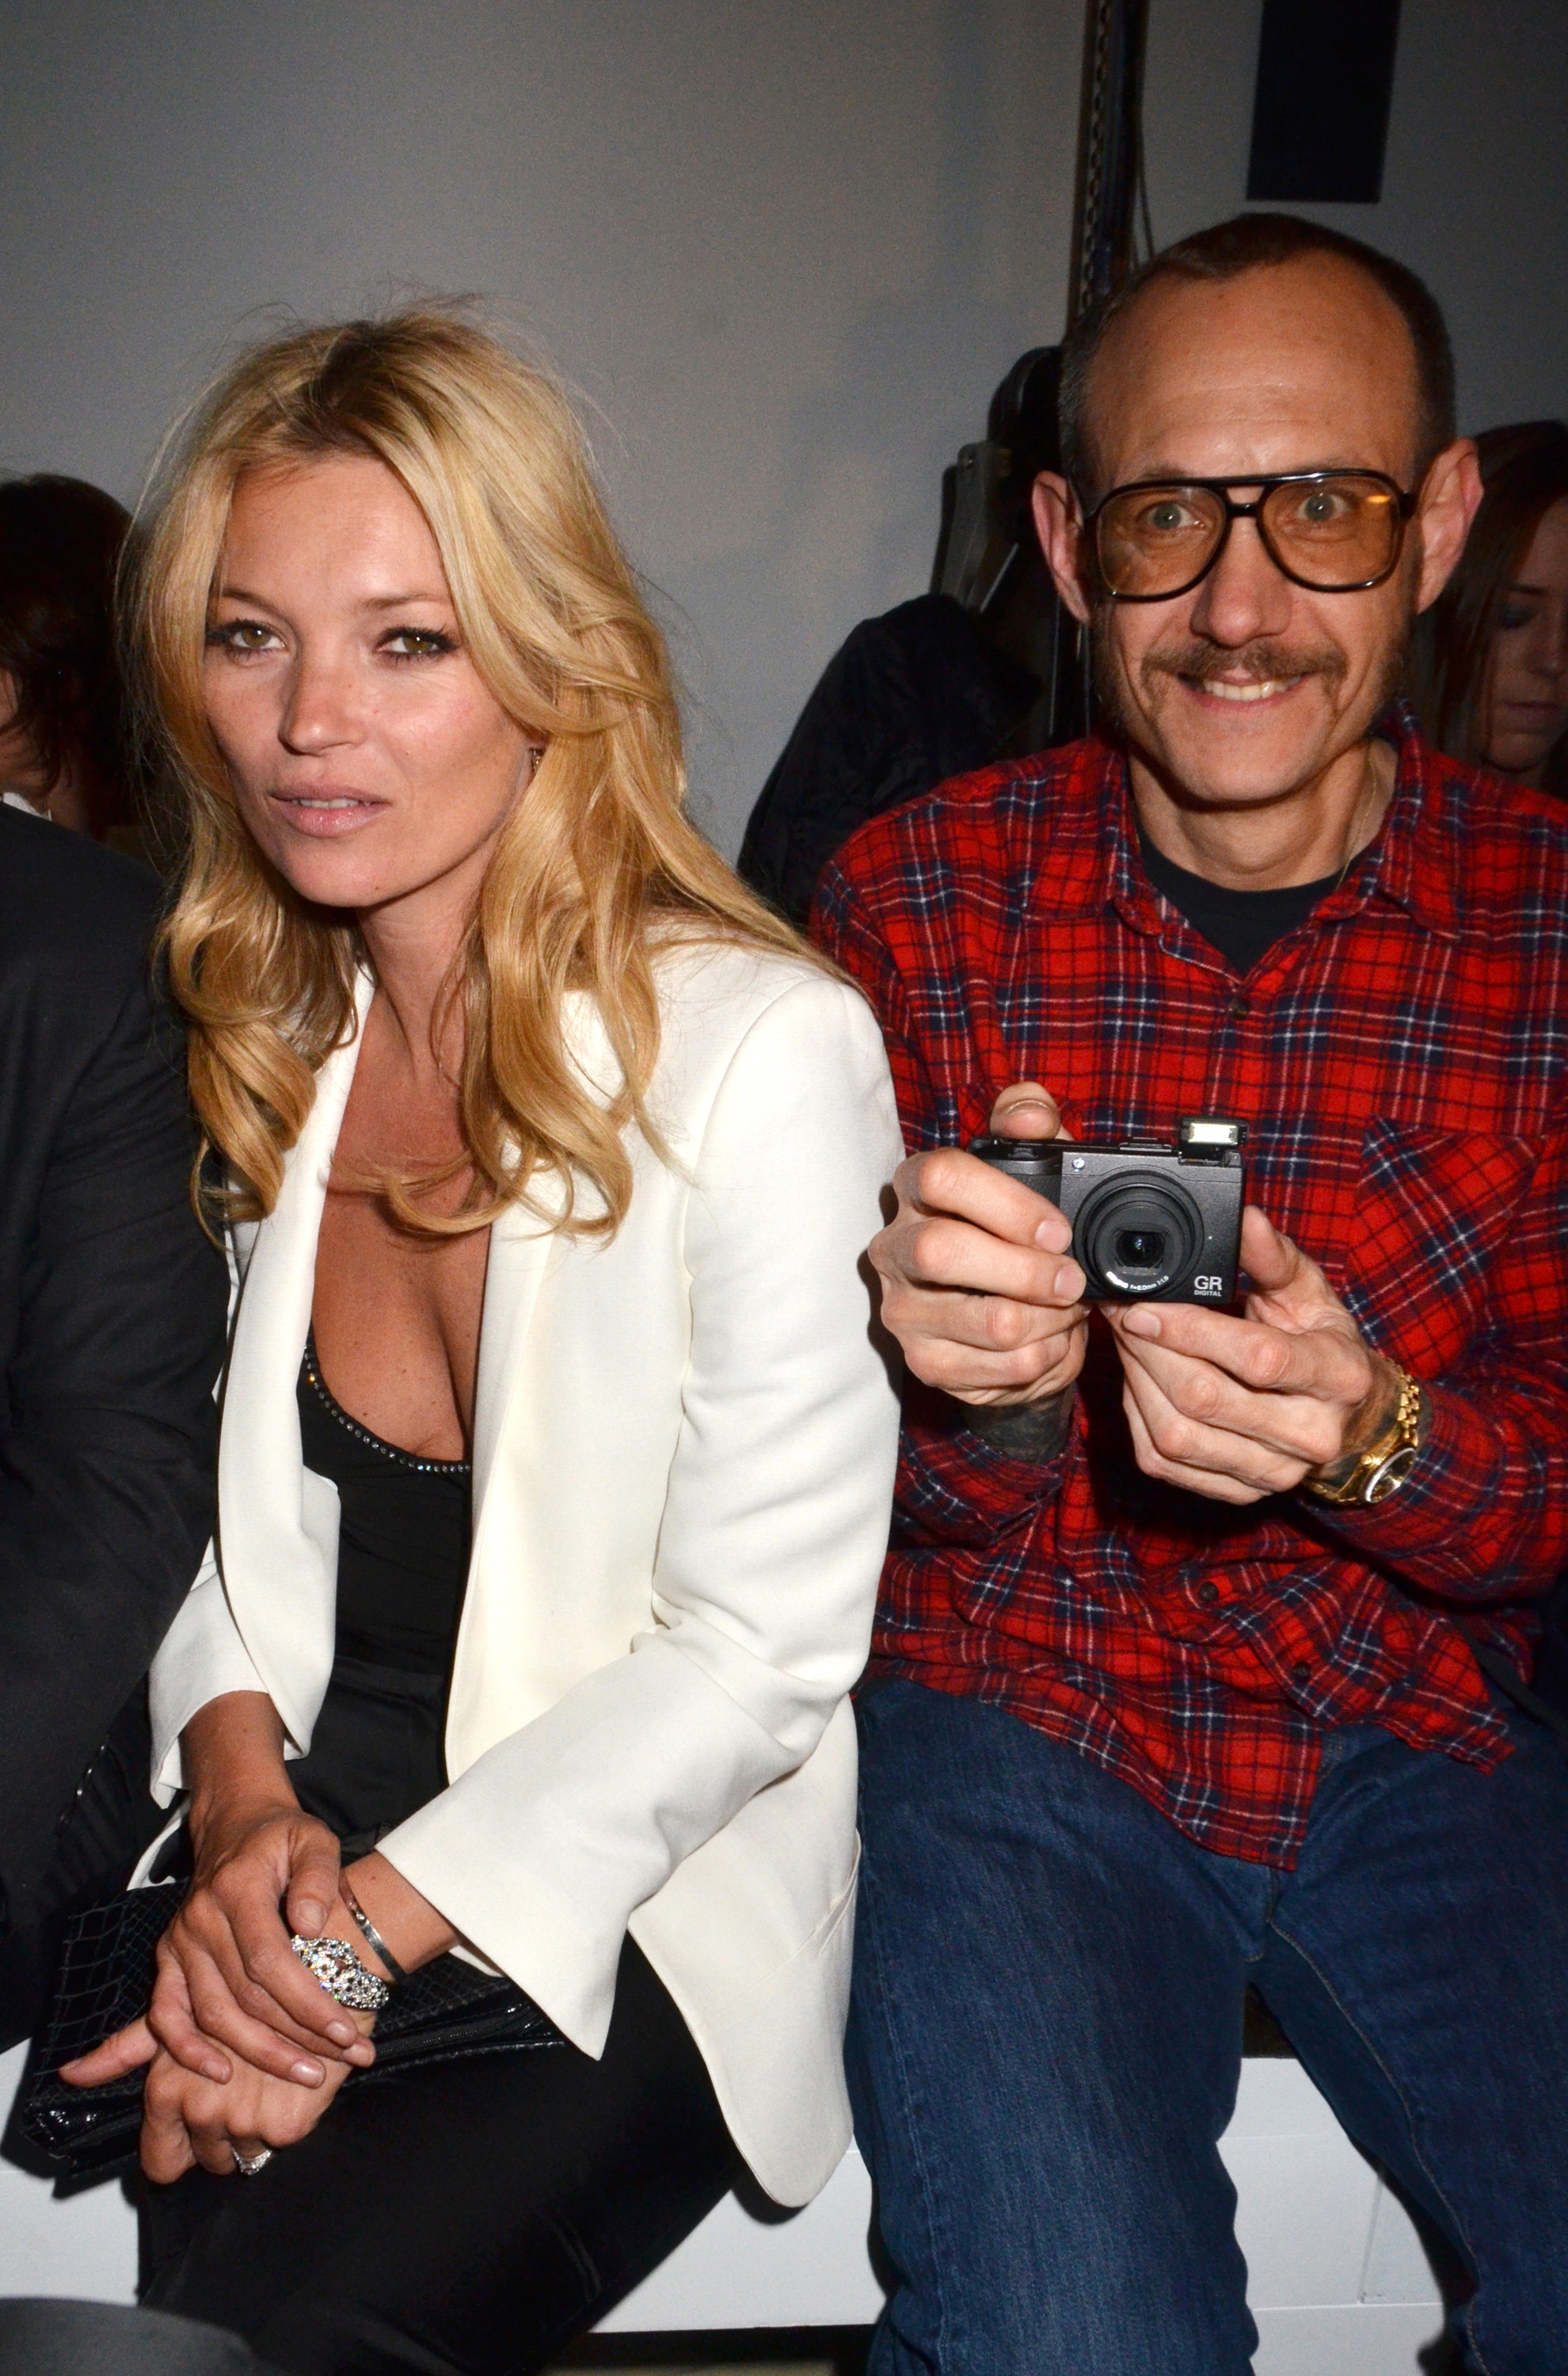 Kate Moss and Terry Richardson&nbsp;attend the Mango New Collection Presentation at Centre Pompidou on 17 May 2011 in Paris, France.&nbsp;